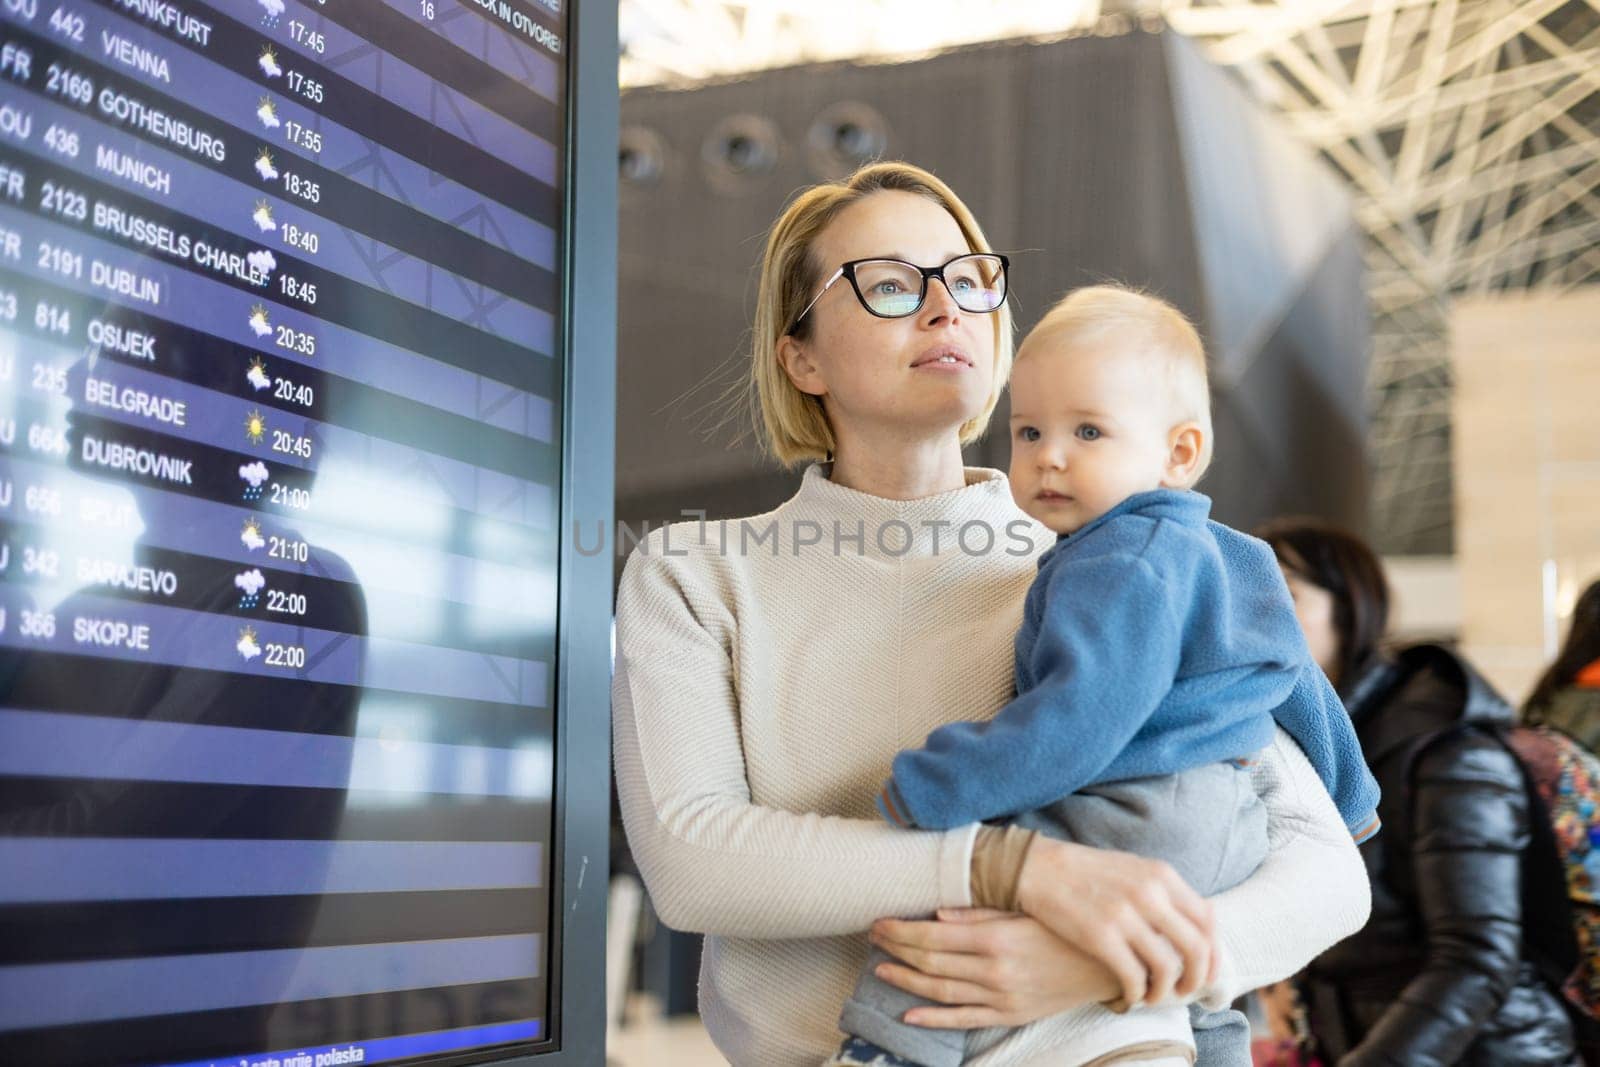 Mother traveling with child, holding his infant baby boy at airport terminal, checking flight schedule, waiting to board a plane. Travel with kids concept. by kasto